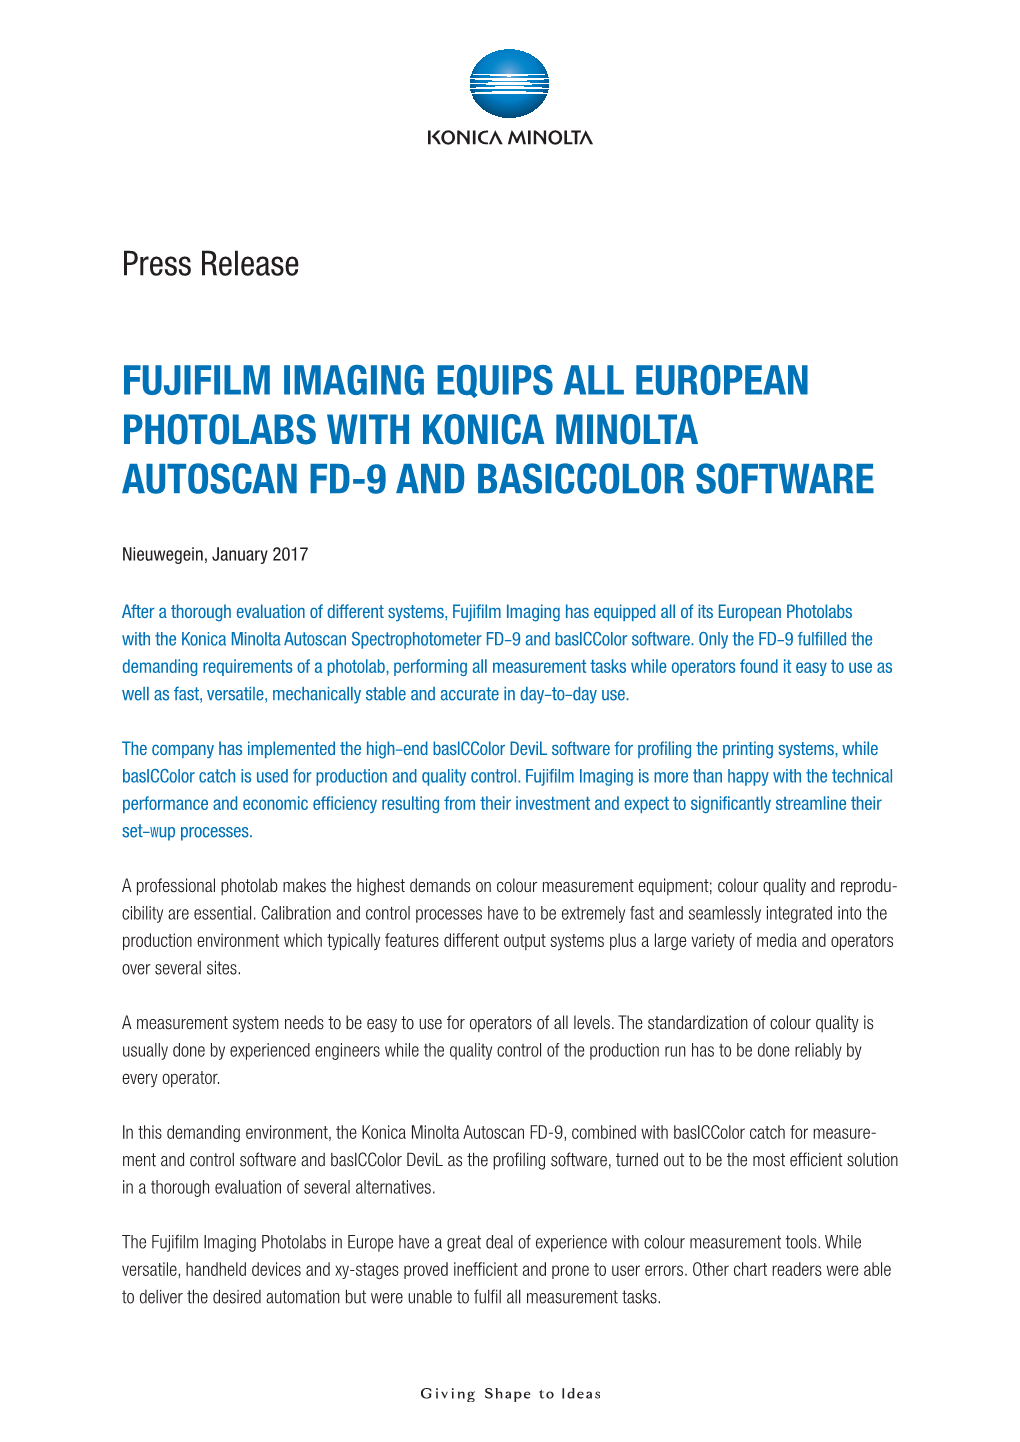 Fujifilm Imaging Equips All European Photolabs with Konica Minolta Autoscan Fd-9 and Basiccolor Software